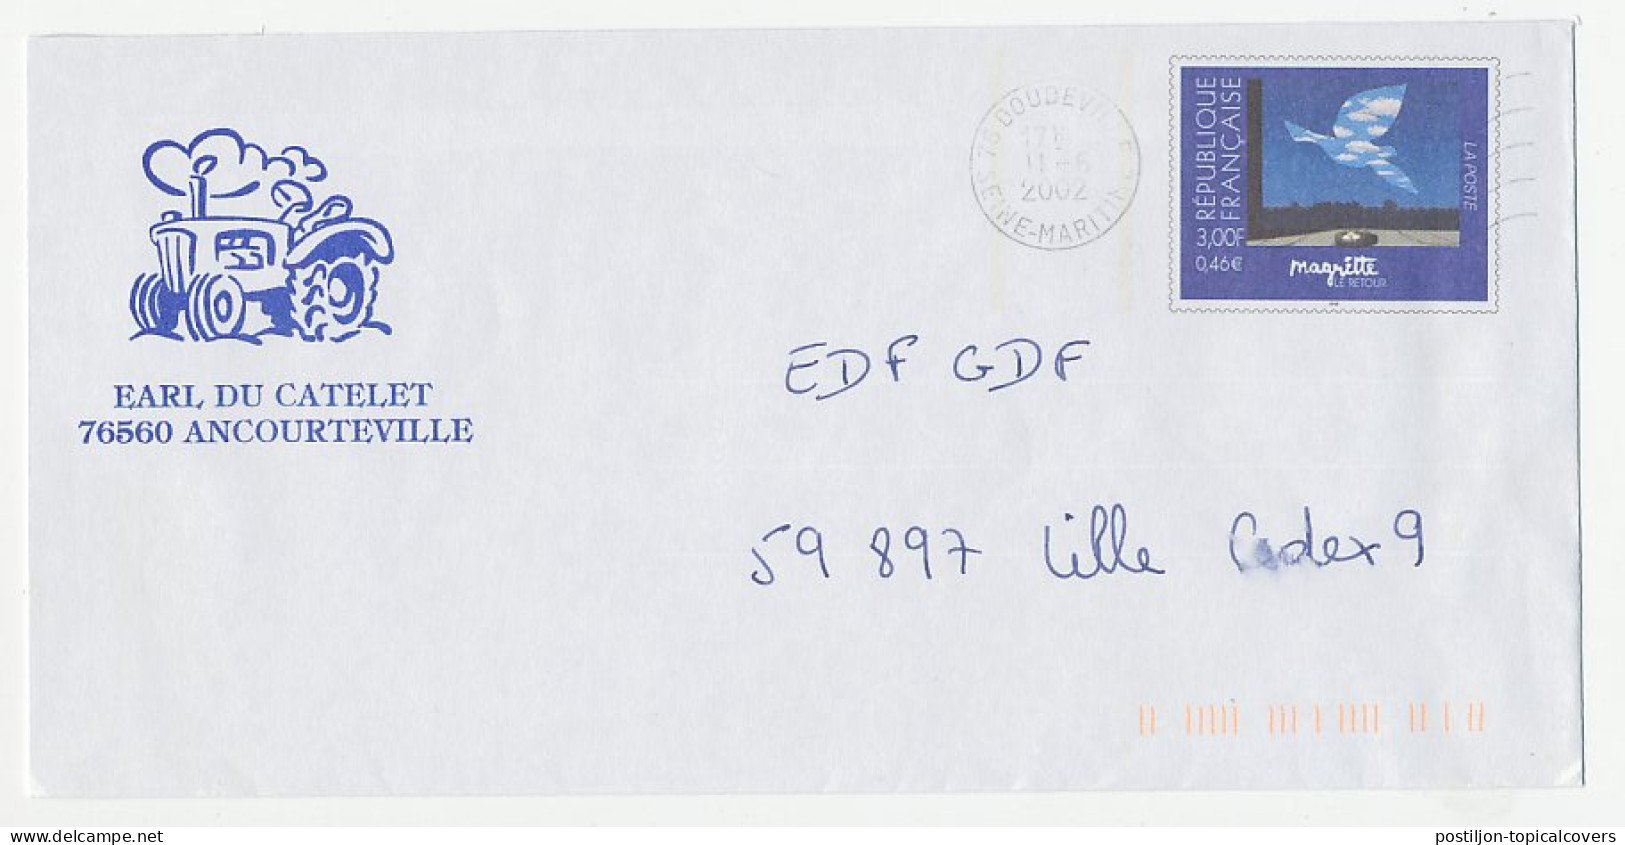 Postal Stationery / PAP France 2002 Tractor - Agriculture